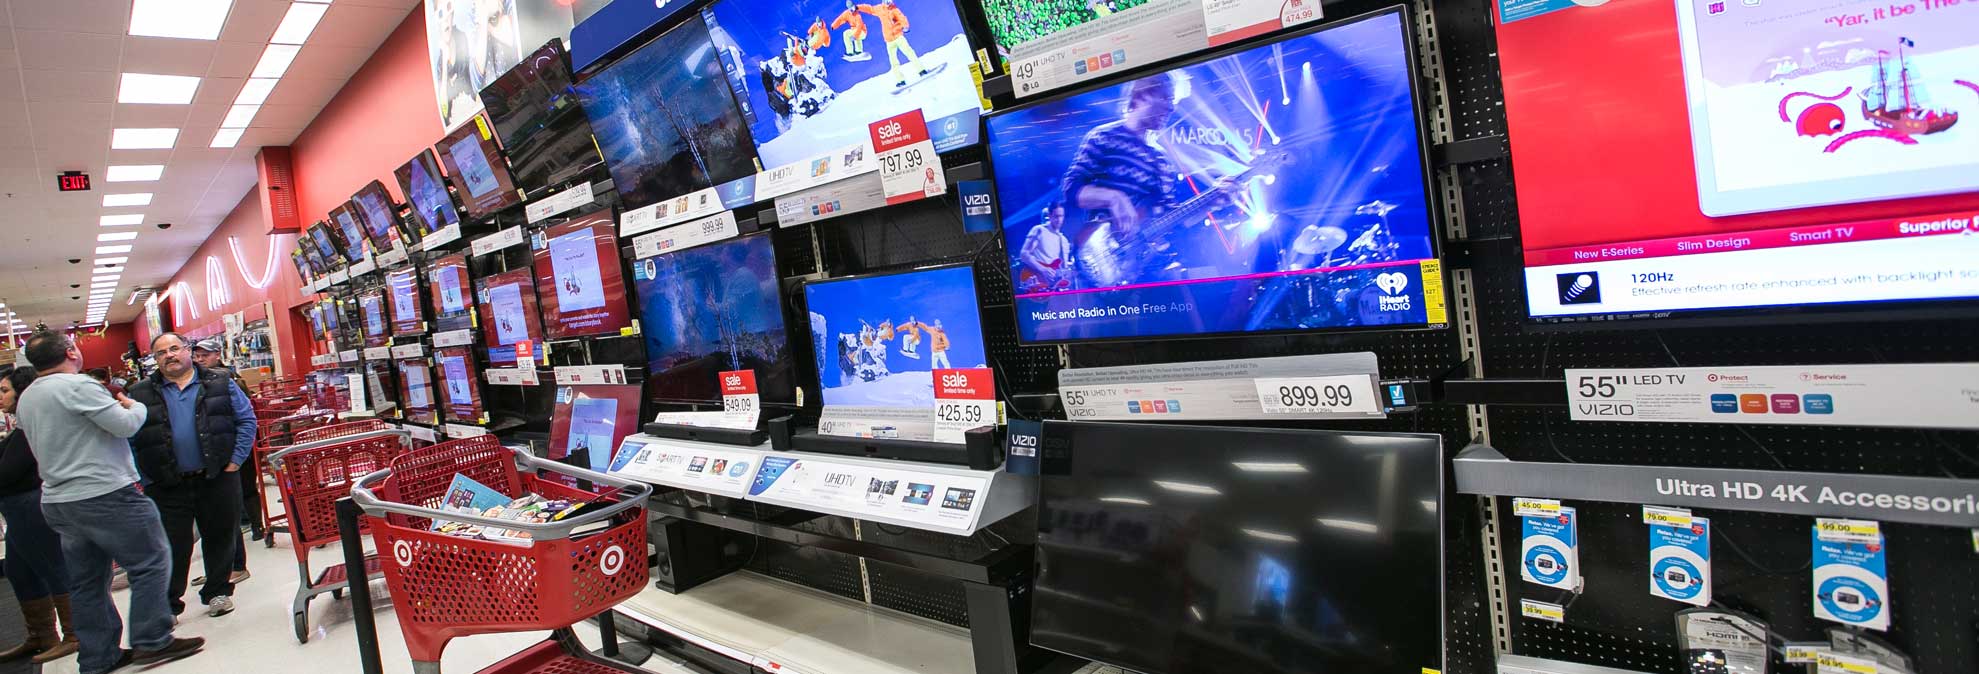 Target Best and Worst Black Friday TV Deals - Consumer Reports